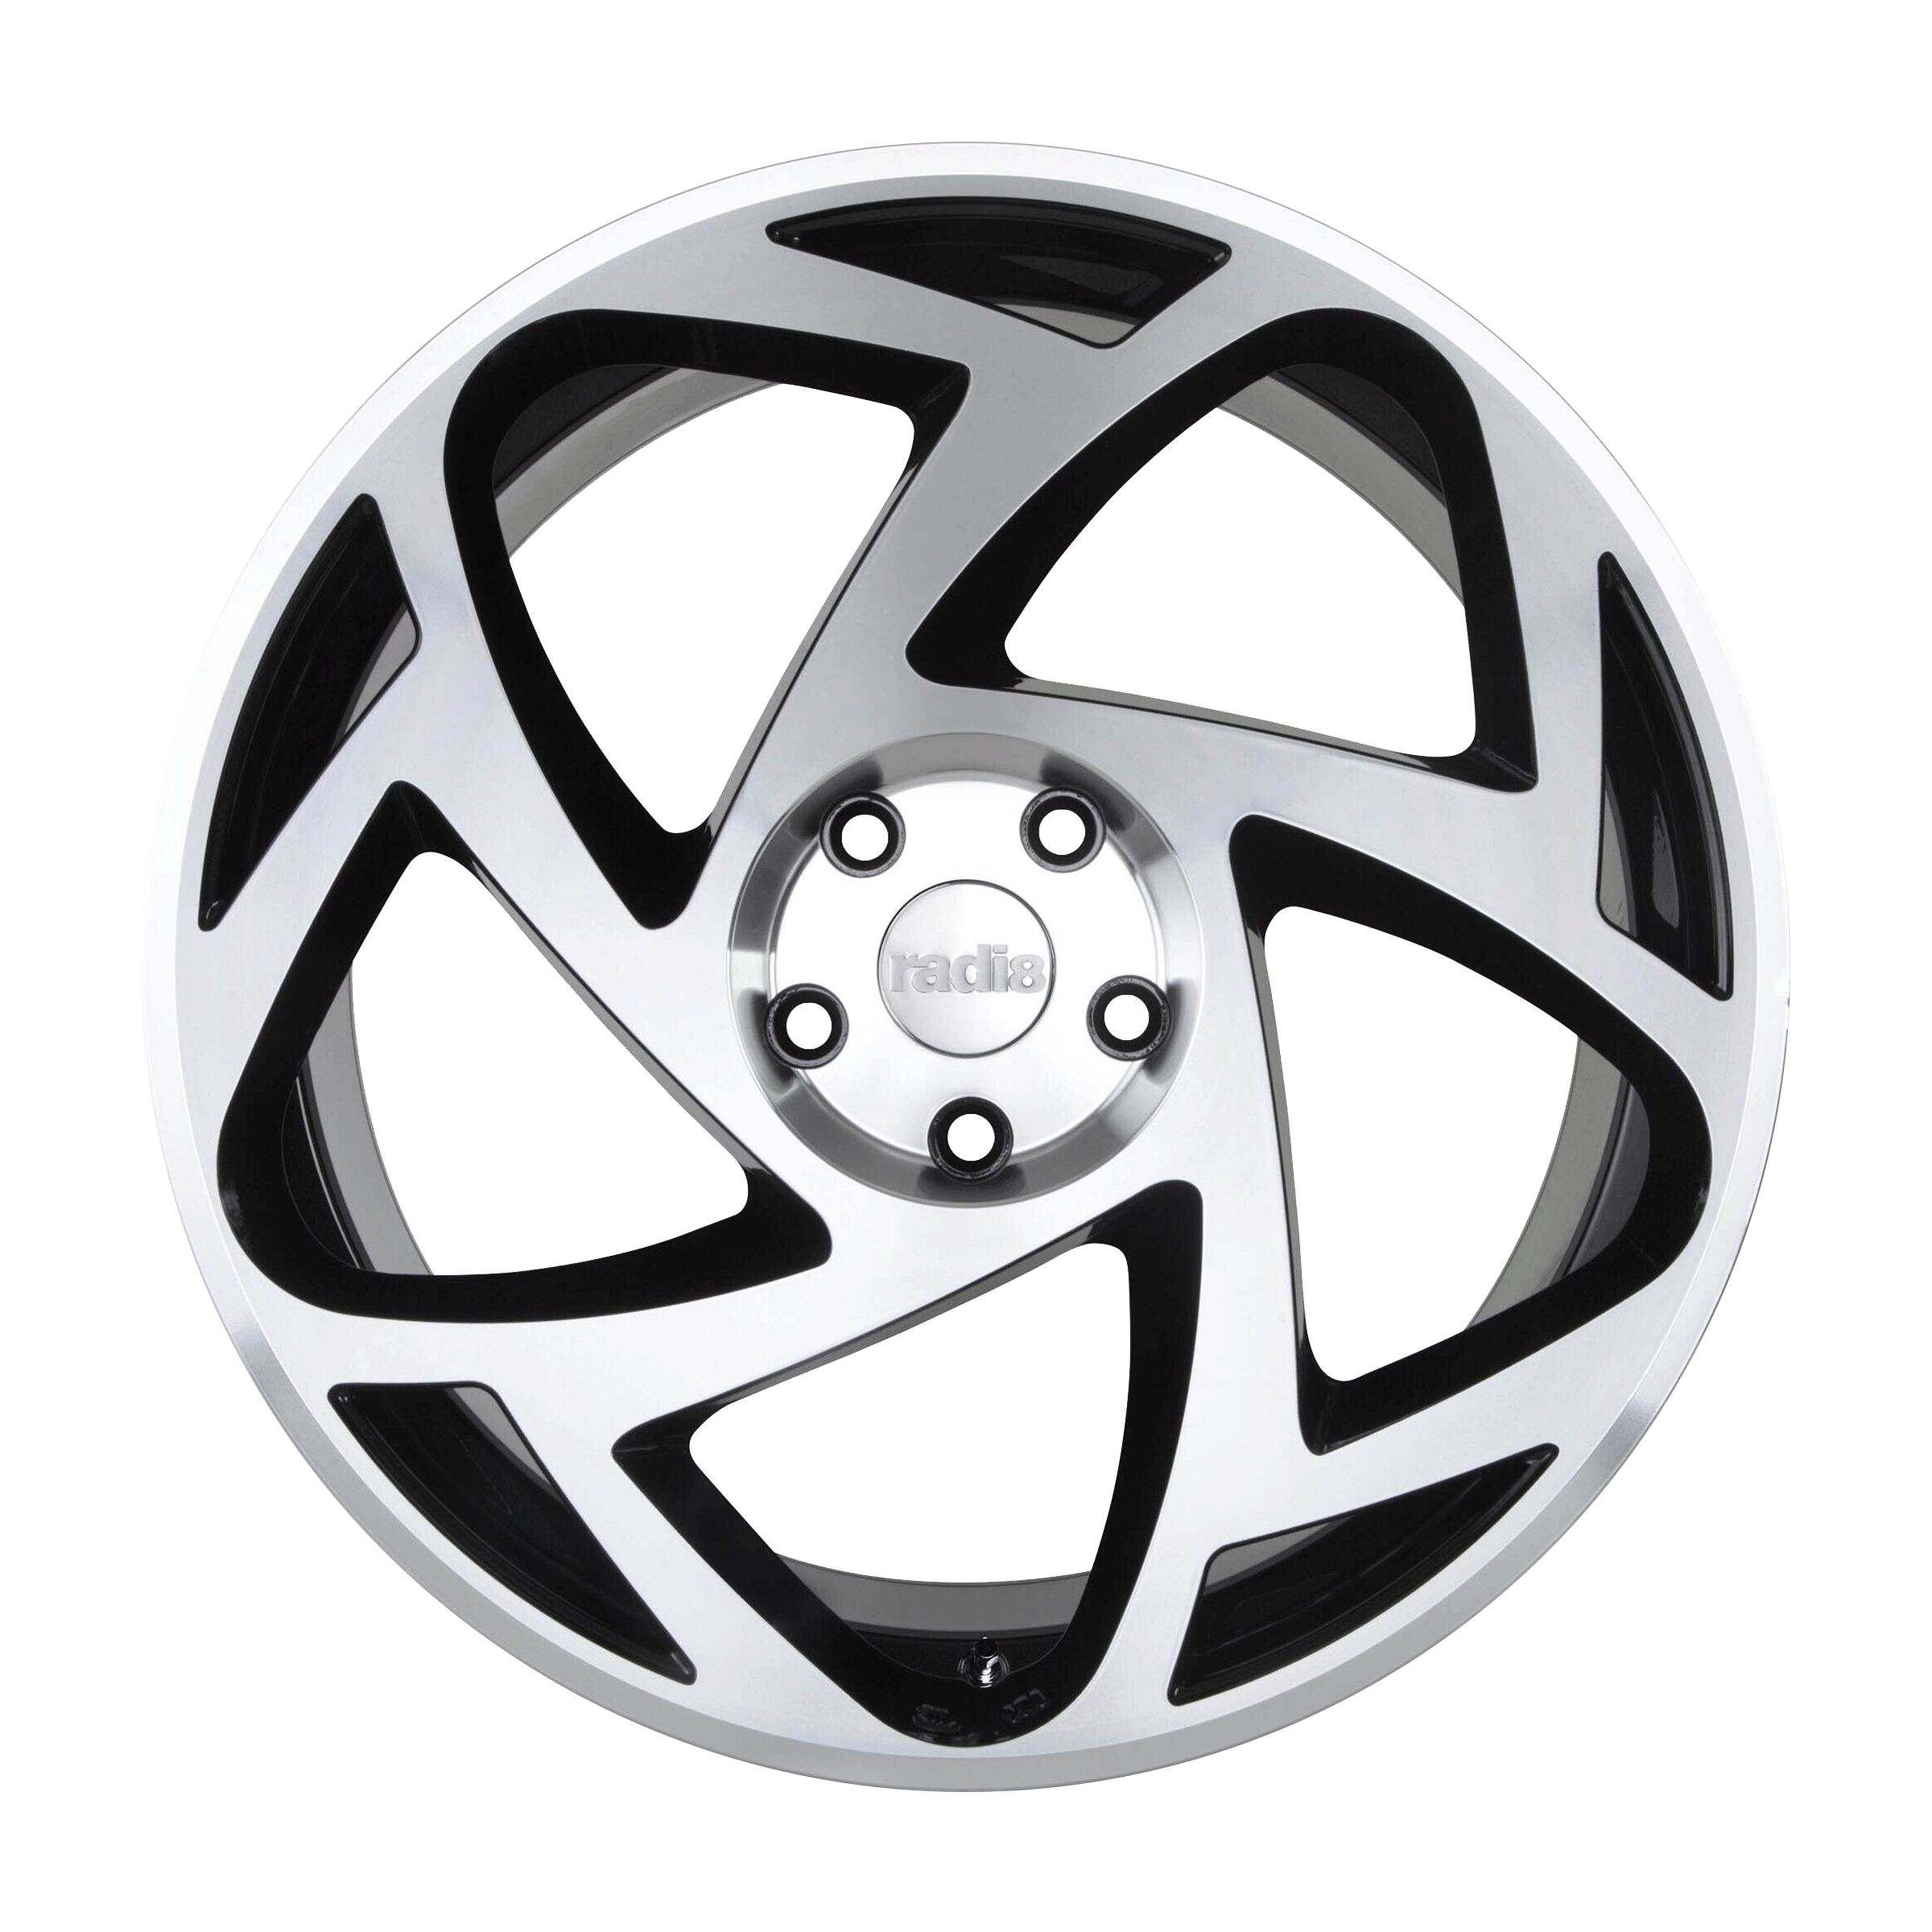 NEW 20  RADI8 R8S5 ALLOY WHEELS IN GLOSS BLACK WITH POLISHED FACE  WIDER 10  REARS